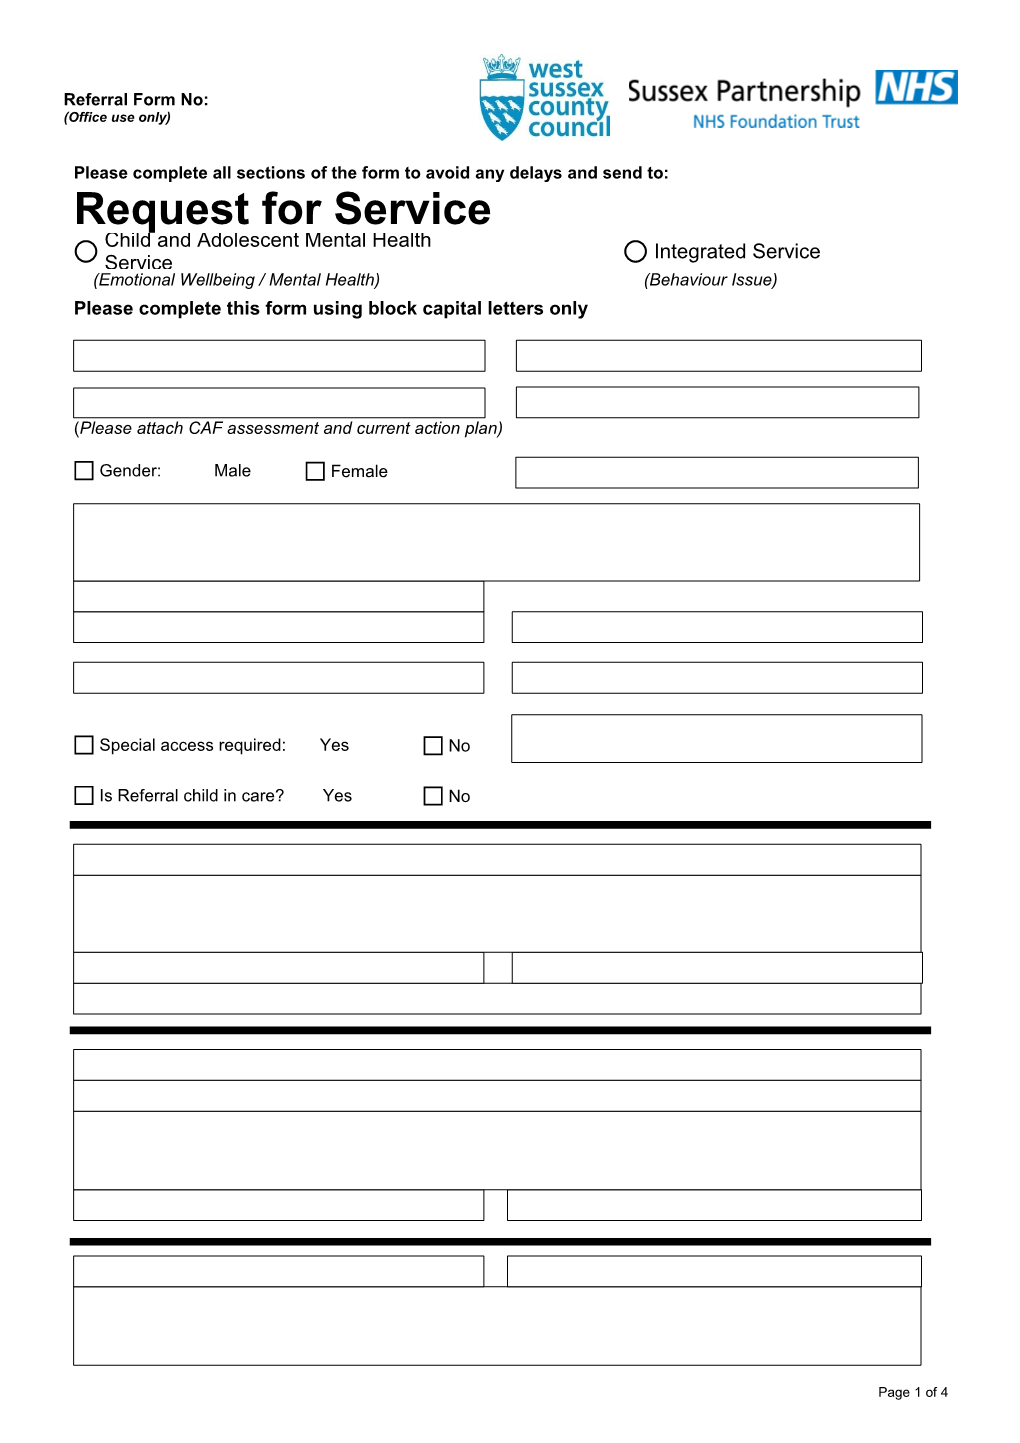 Please Complete This Form Using Block Capital Letters Only